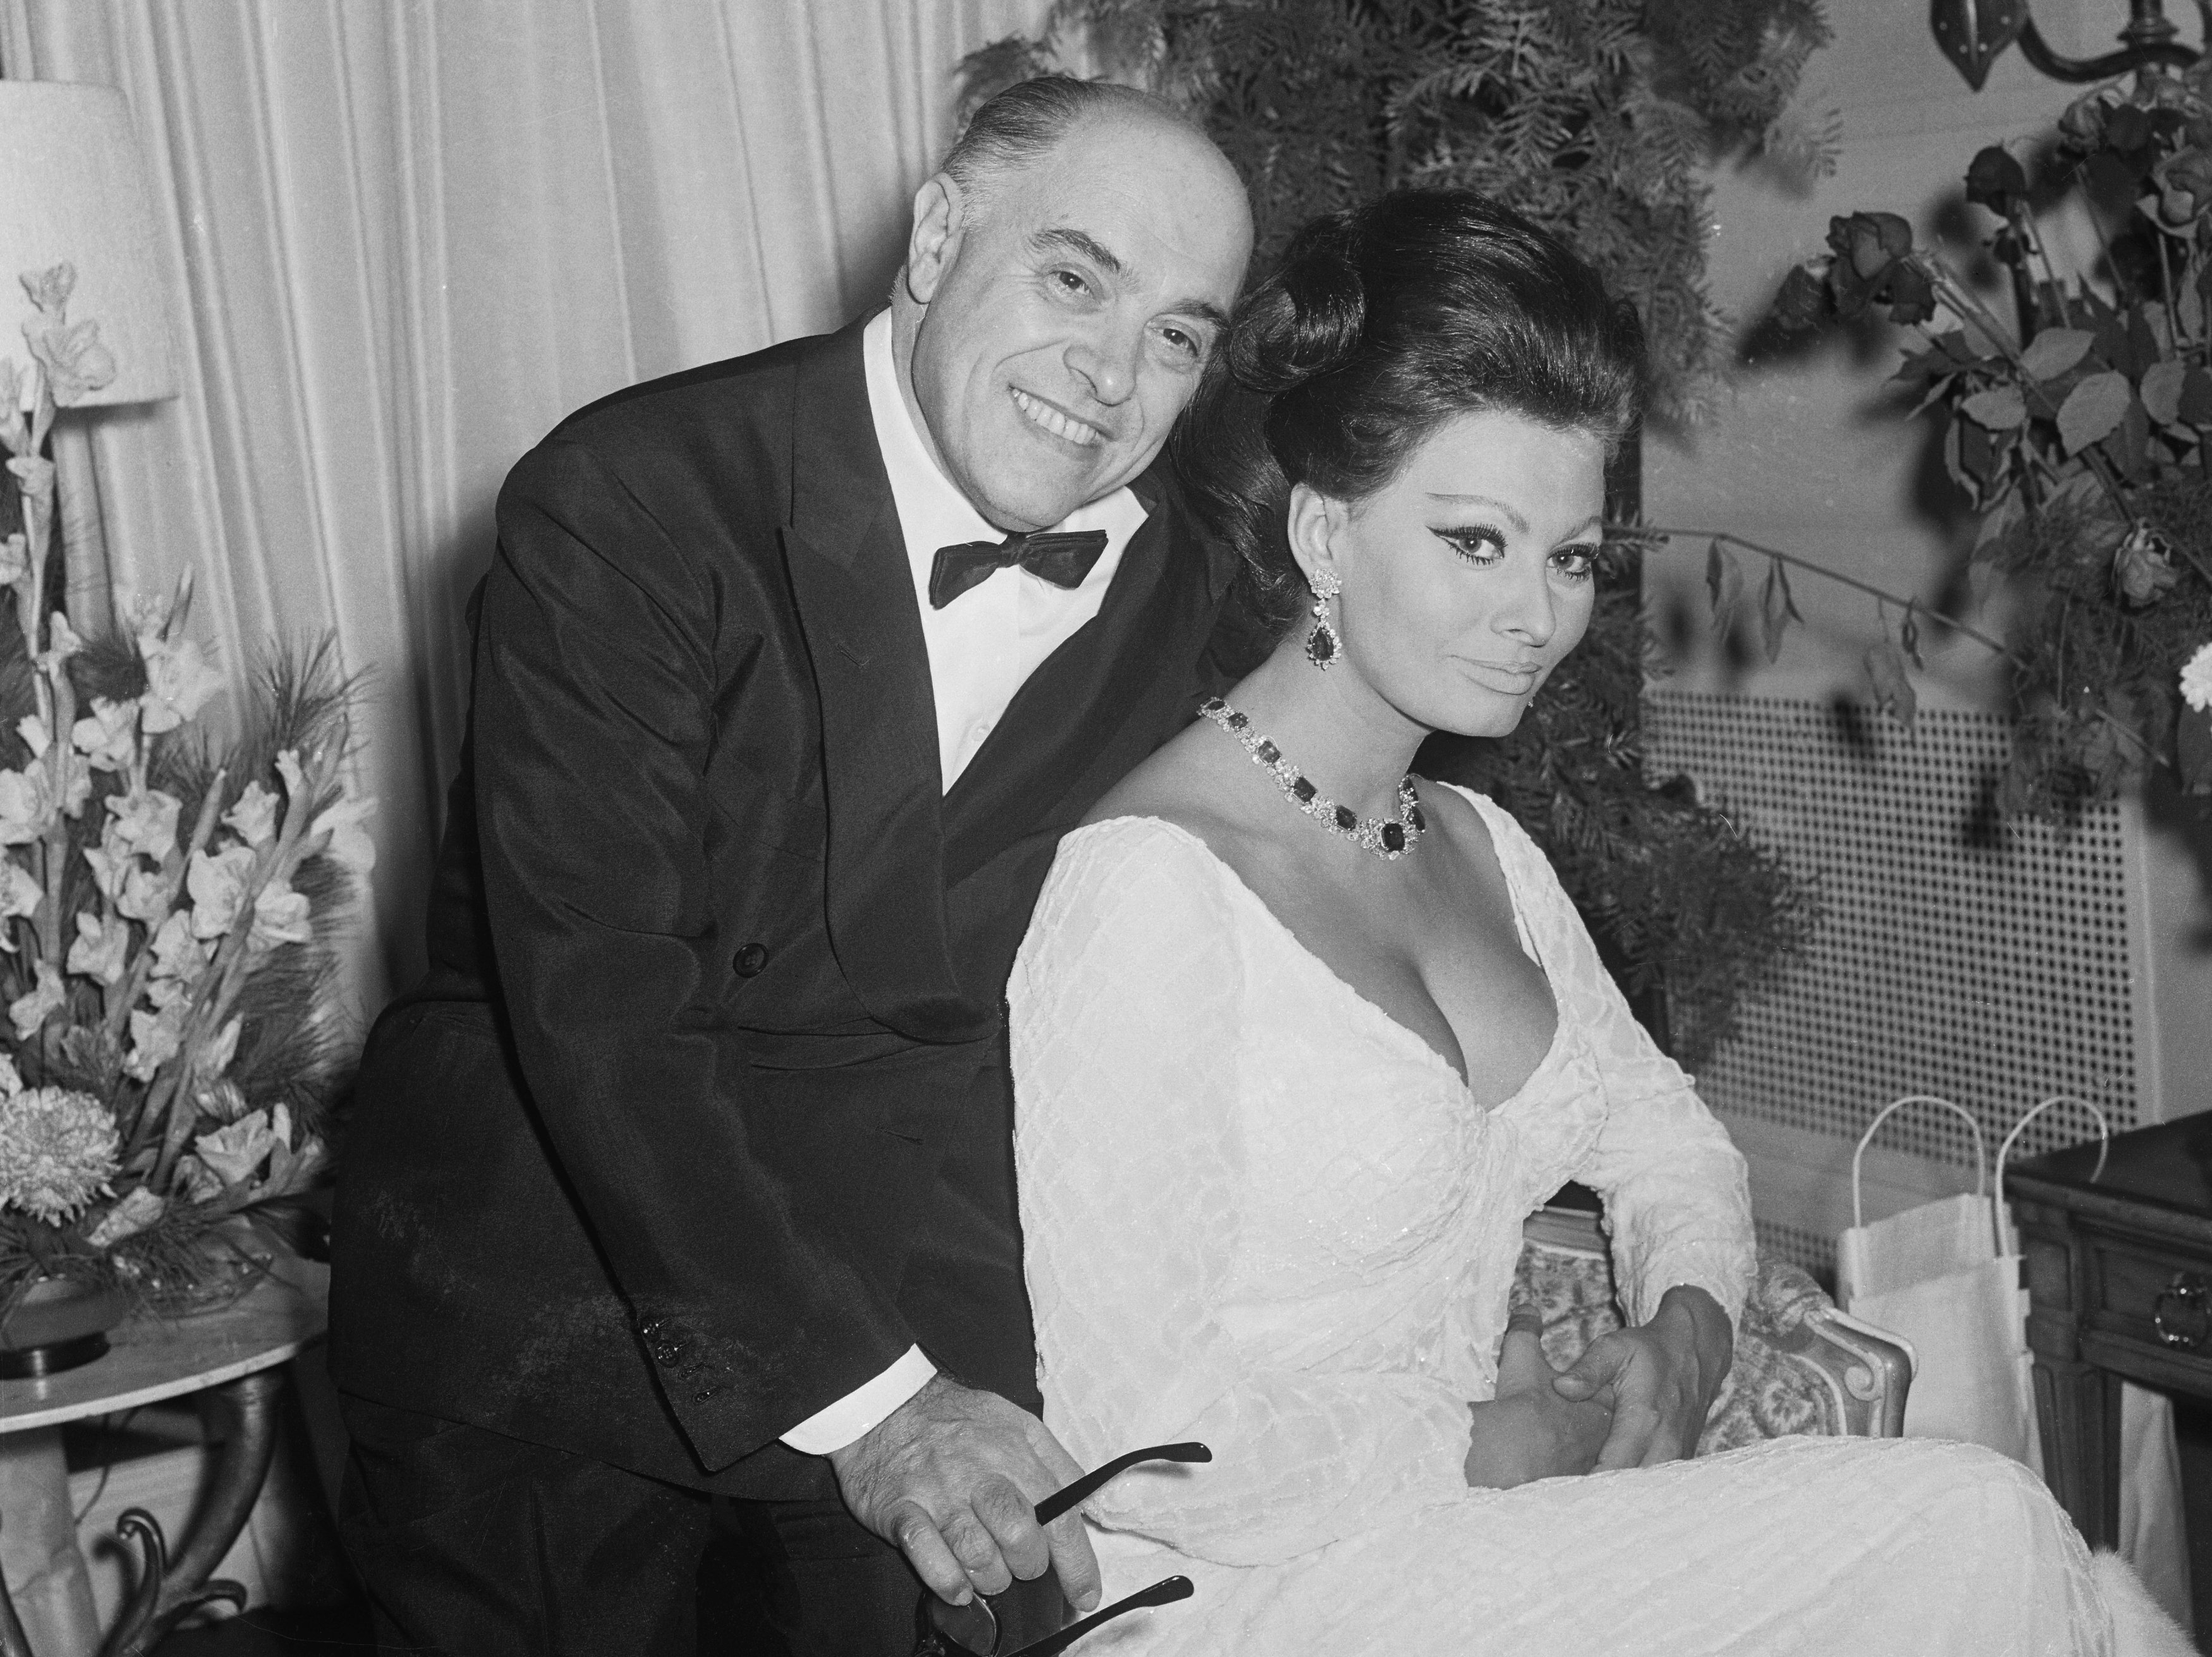 Sophia Loren and producer Carlo Ponti relax at their New York hotel. | Source: Getty Images